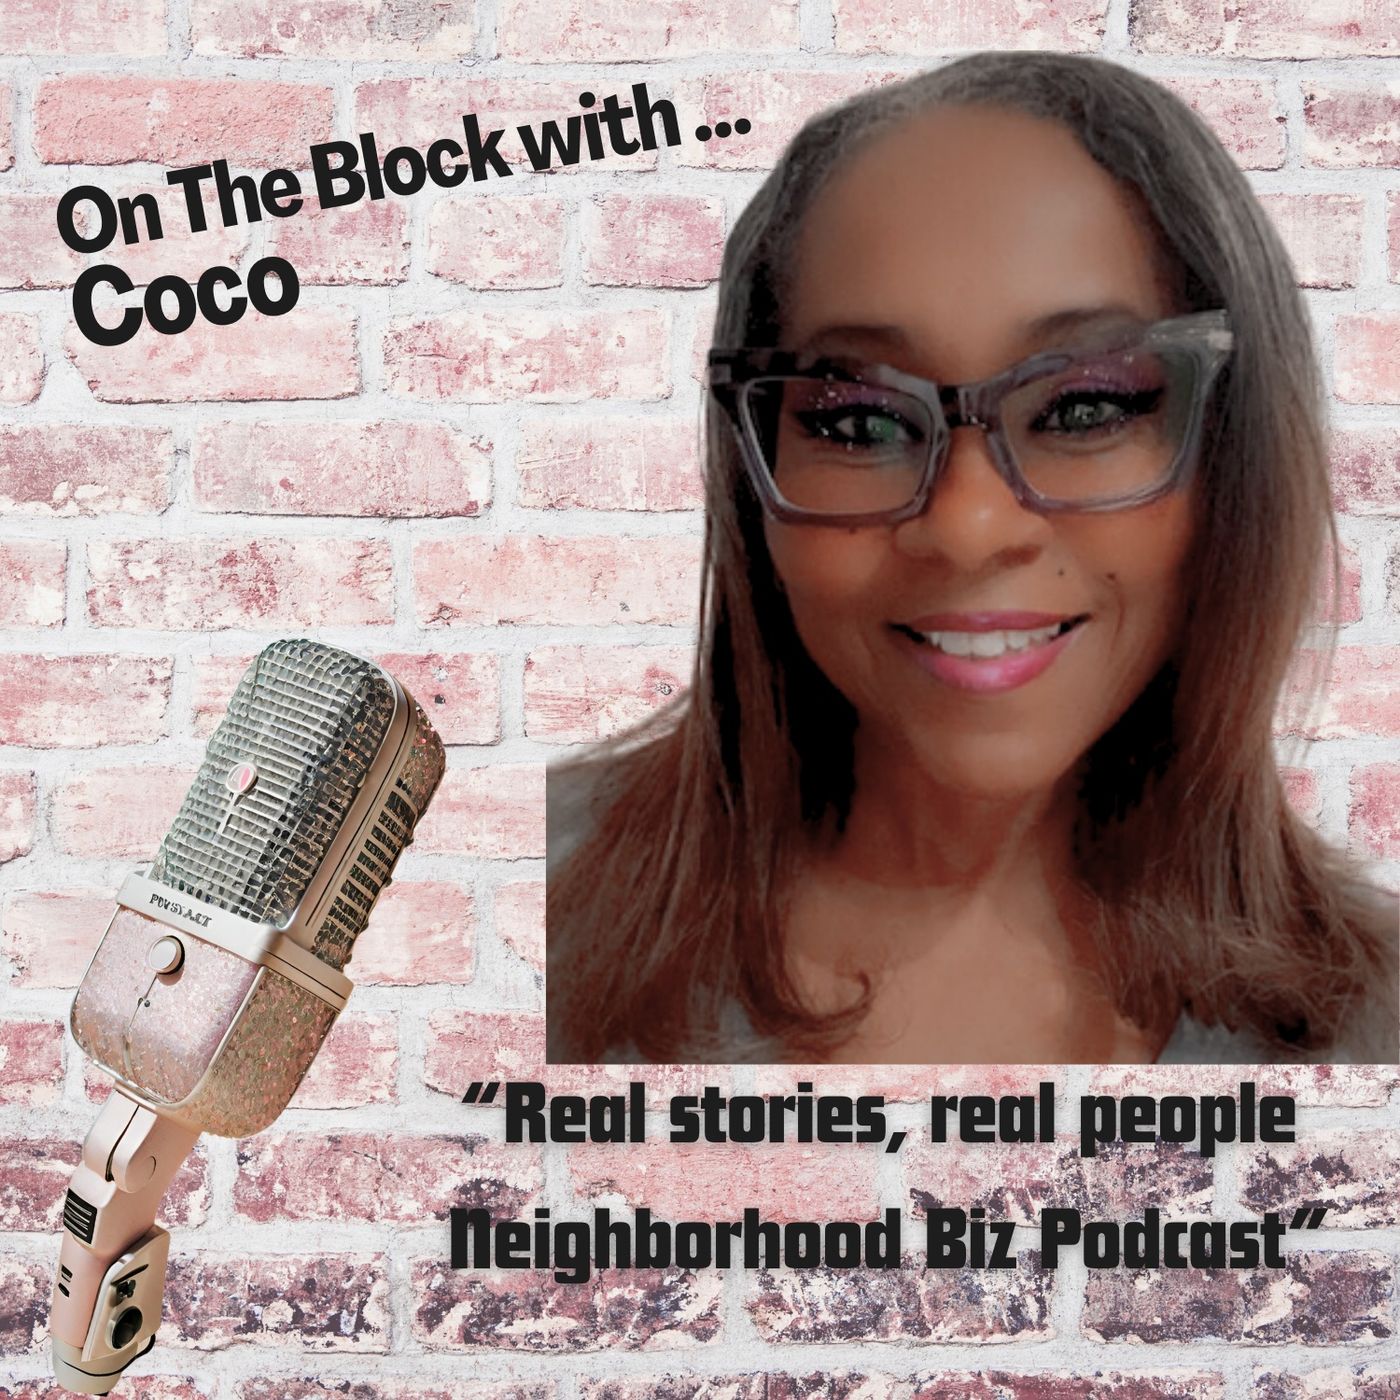 On The Block with…Coco